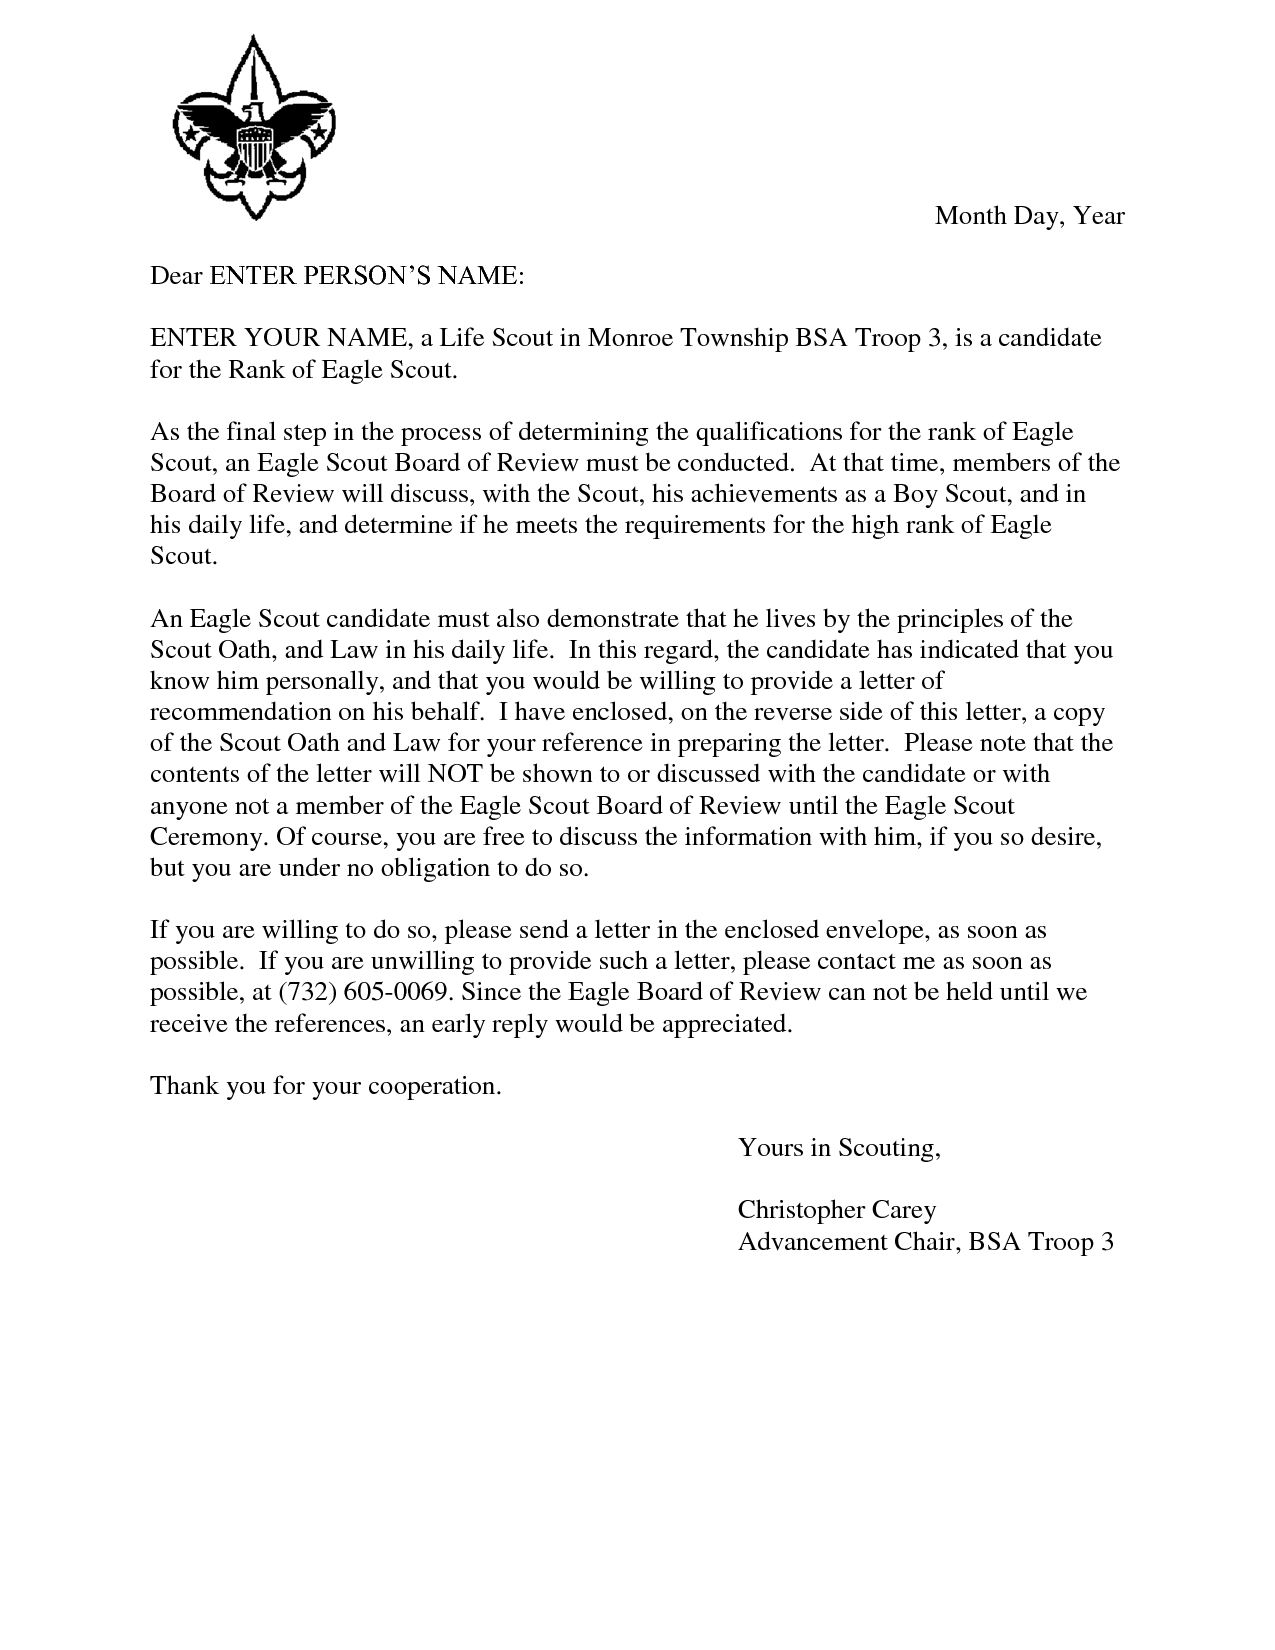 eagle scout donation letter template example-Eagle Scout Reference Request Sample Letter DOC 7 by Hfr990Q TGQFAGp7 10-p